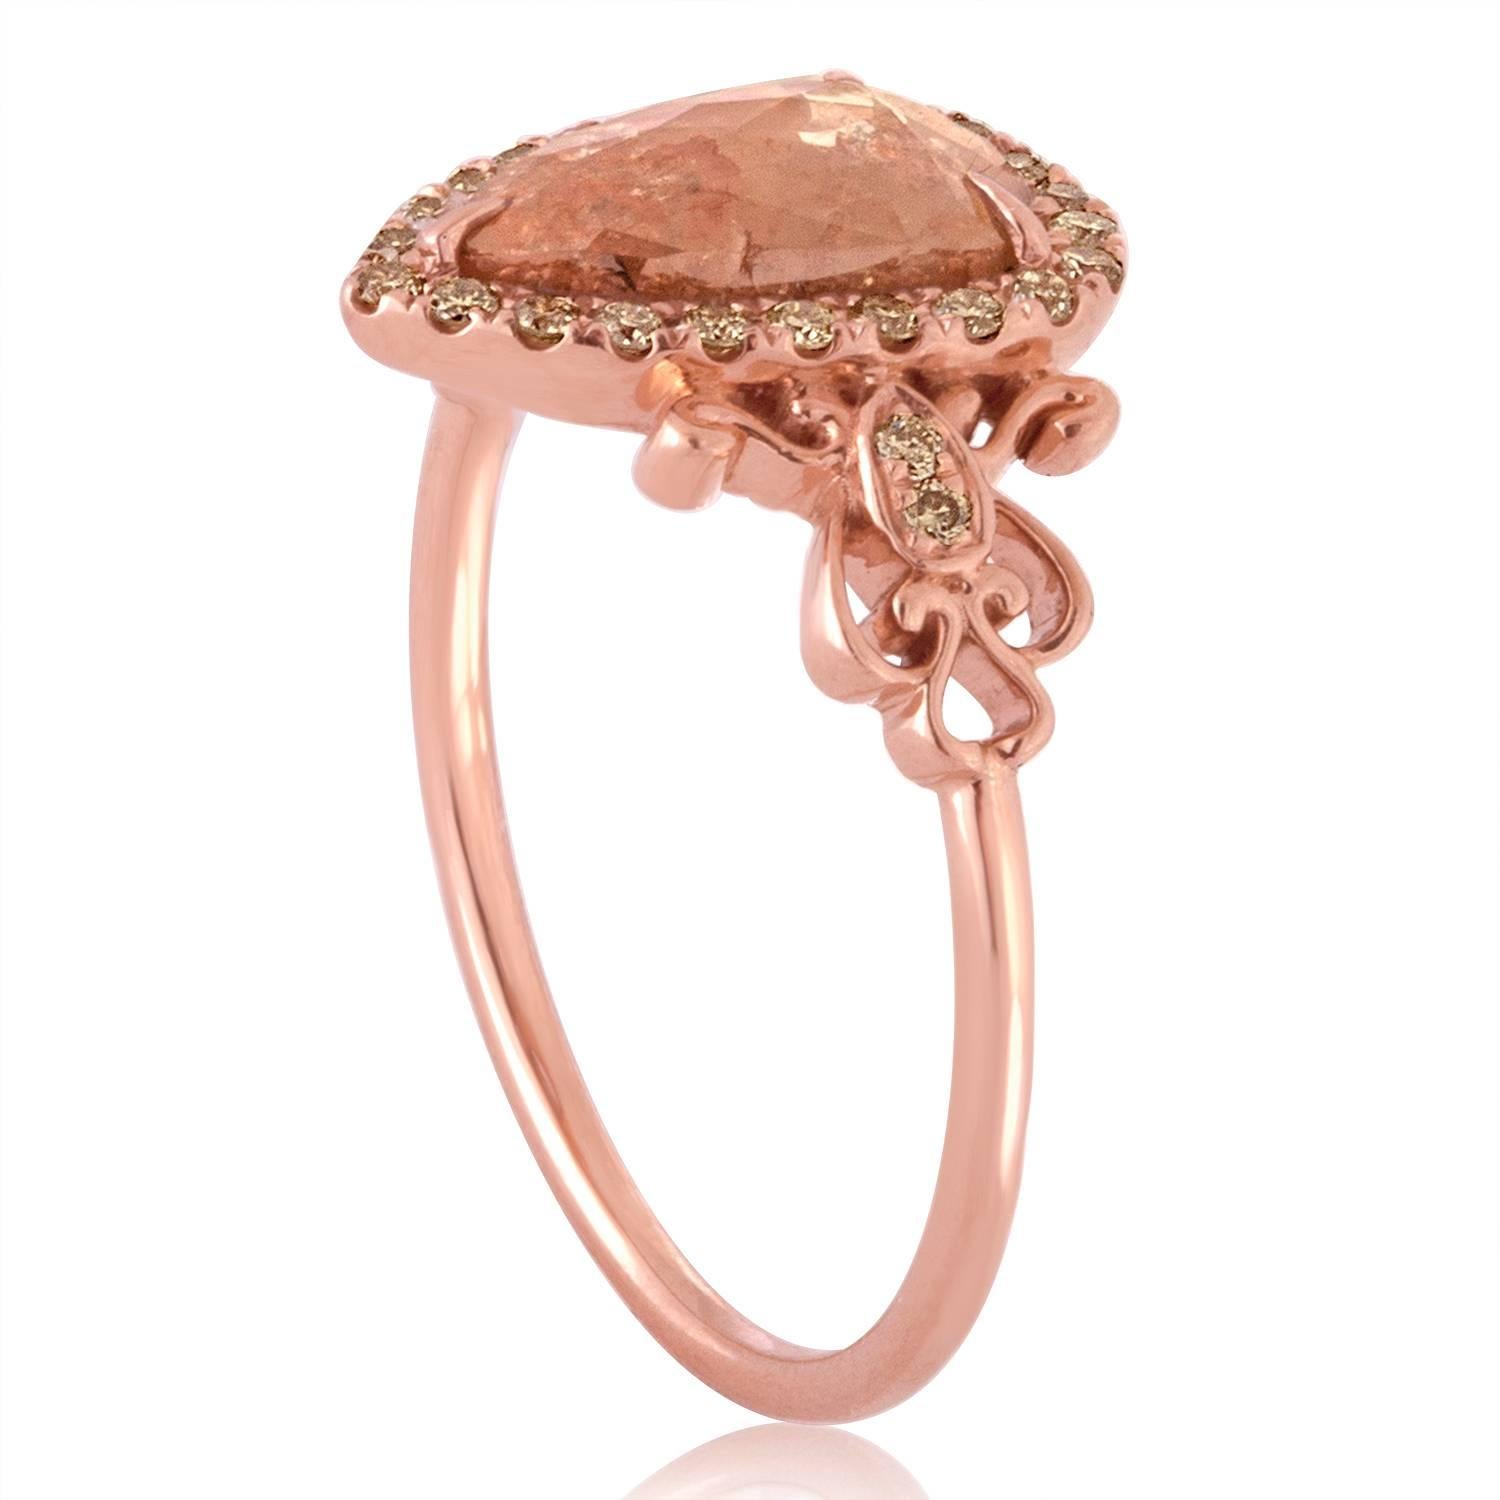 Very Delicate and Fun Ring
The ring is 14K Rose Gold
The center stone is a Pear Shape Diamond Slice about 0.70 Carats.
The pear shape is a Brownish-Orange-Silver Color.
The small Diamonds are Yellowish-Silver about 0.25 Carats
Any imperfections in